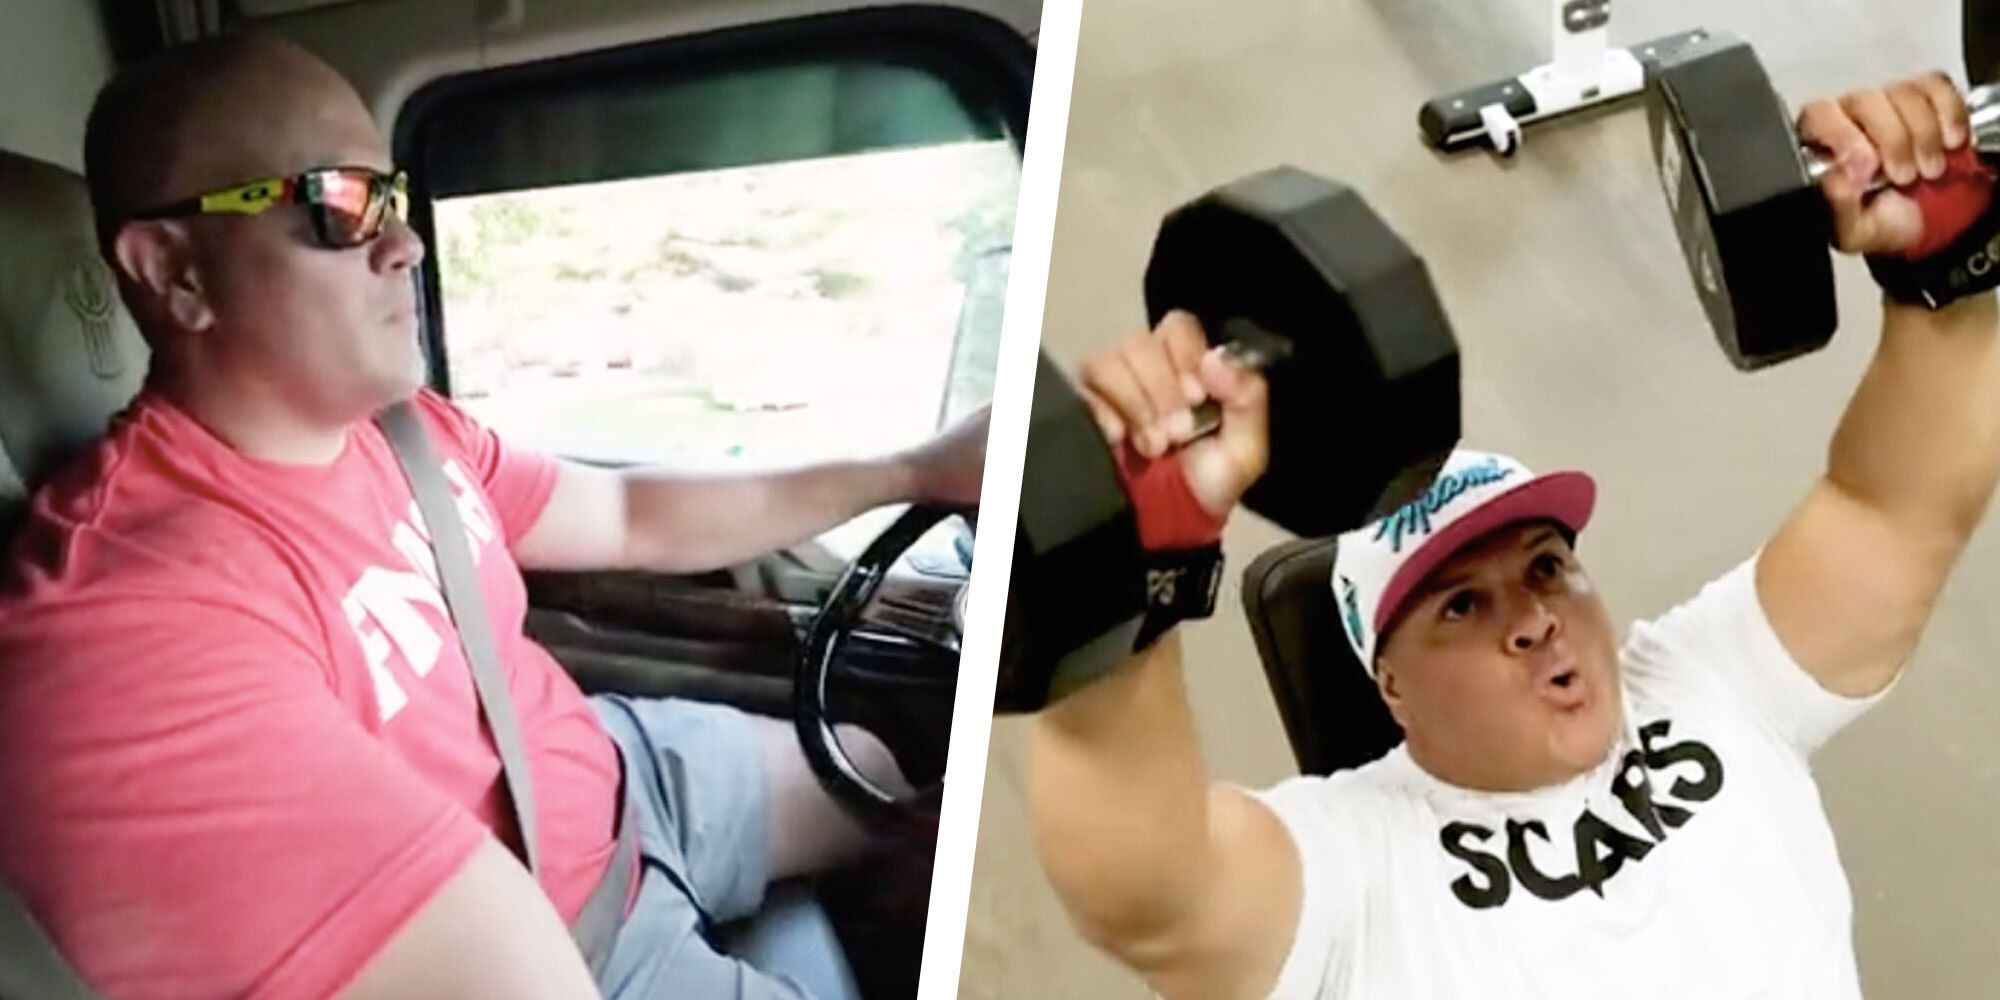 This Trucker Lost Weight and Got Fit While Sitting 10 Hours a image image